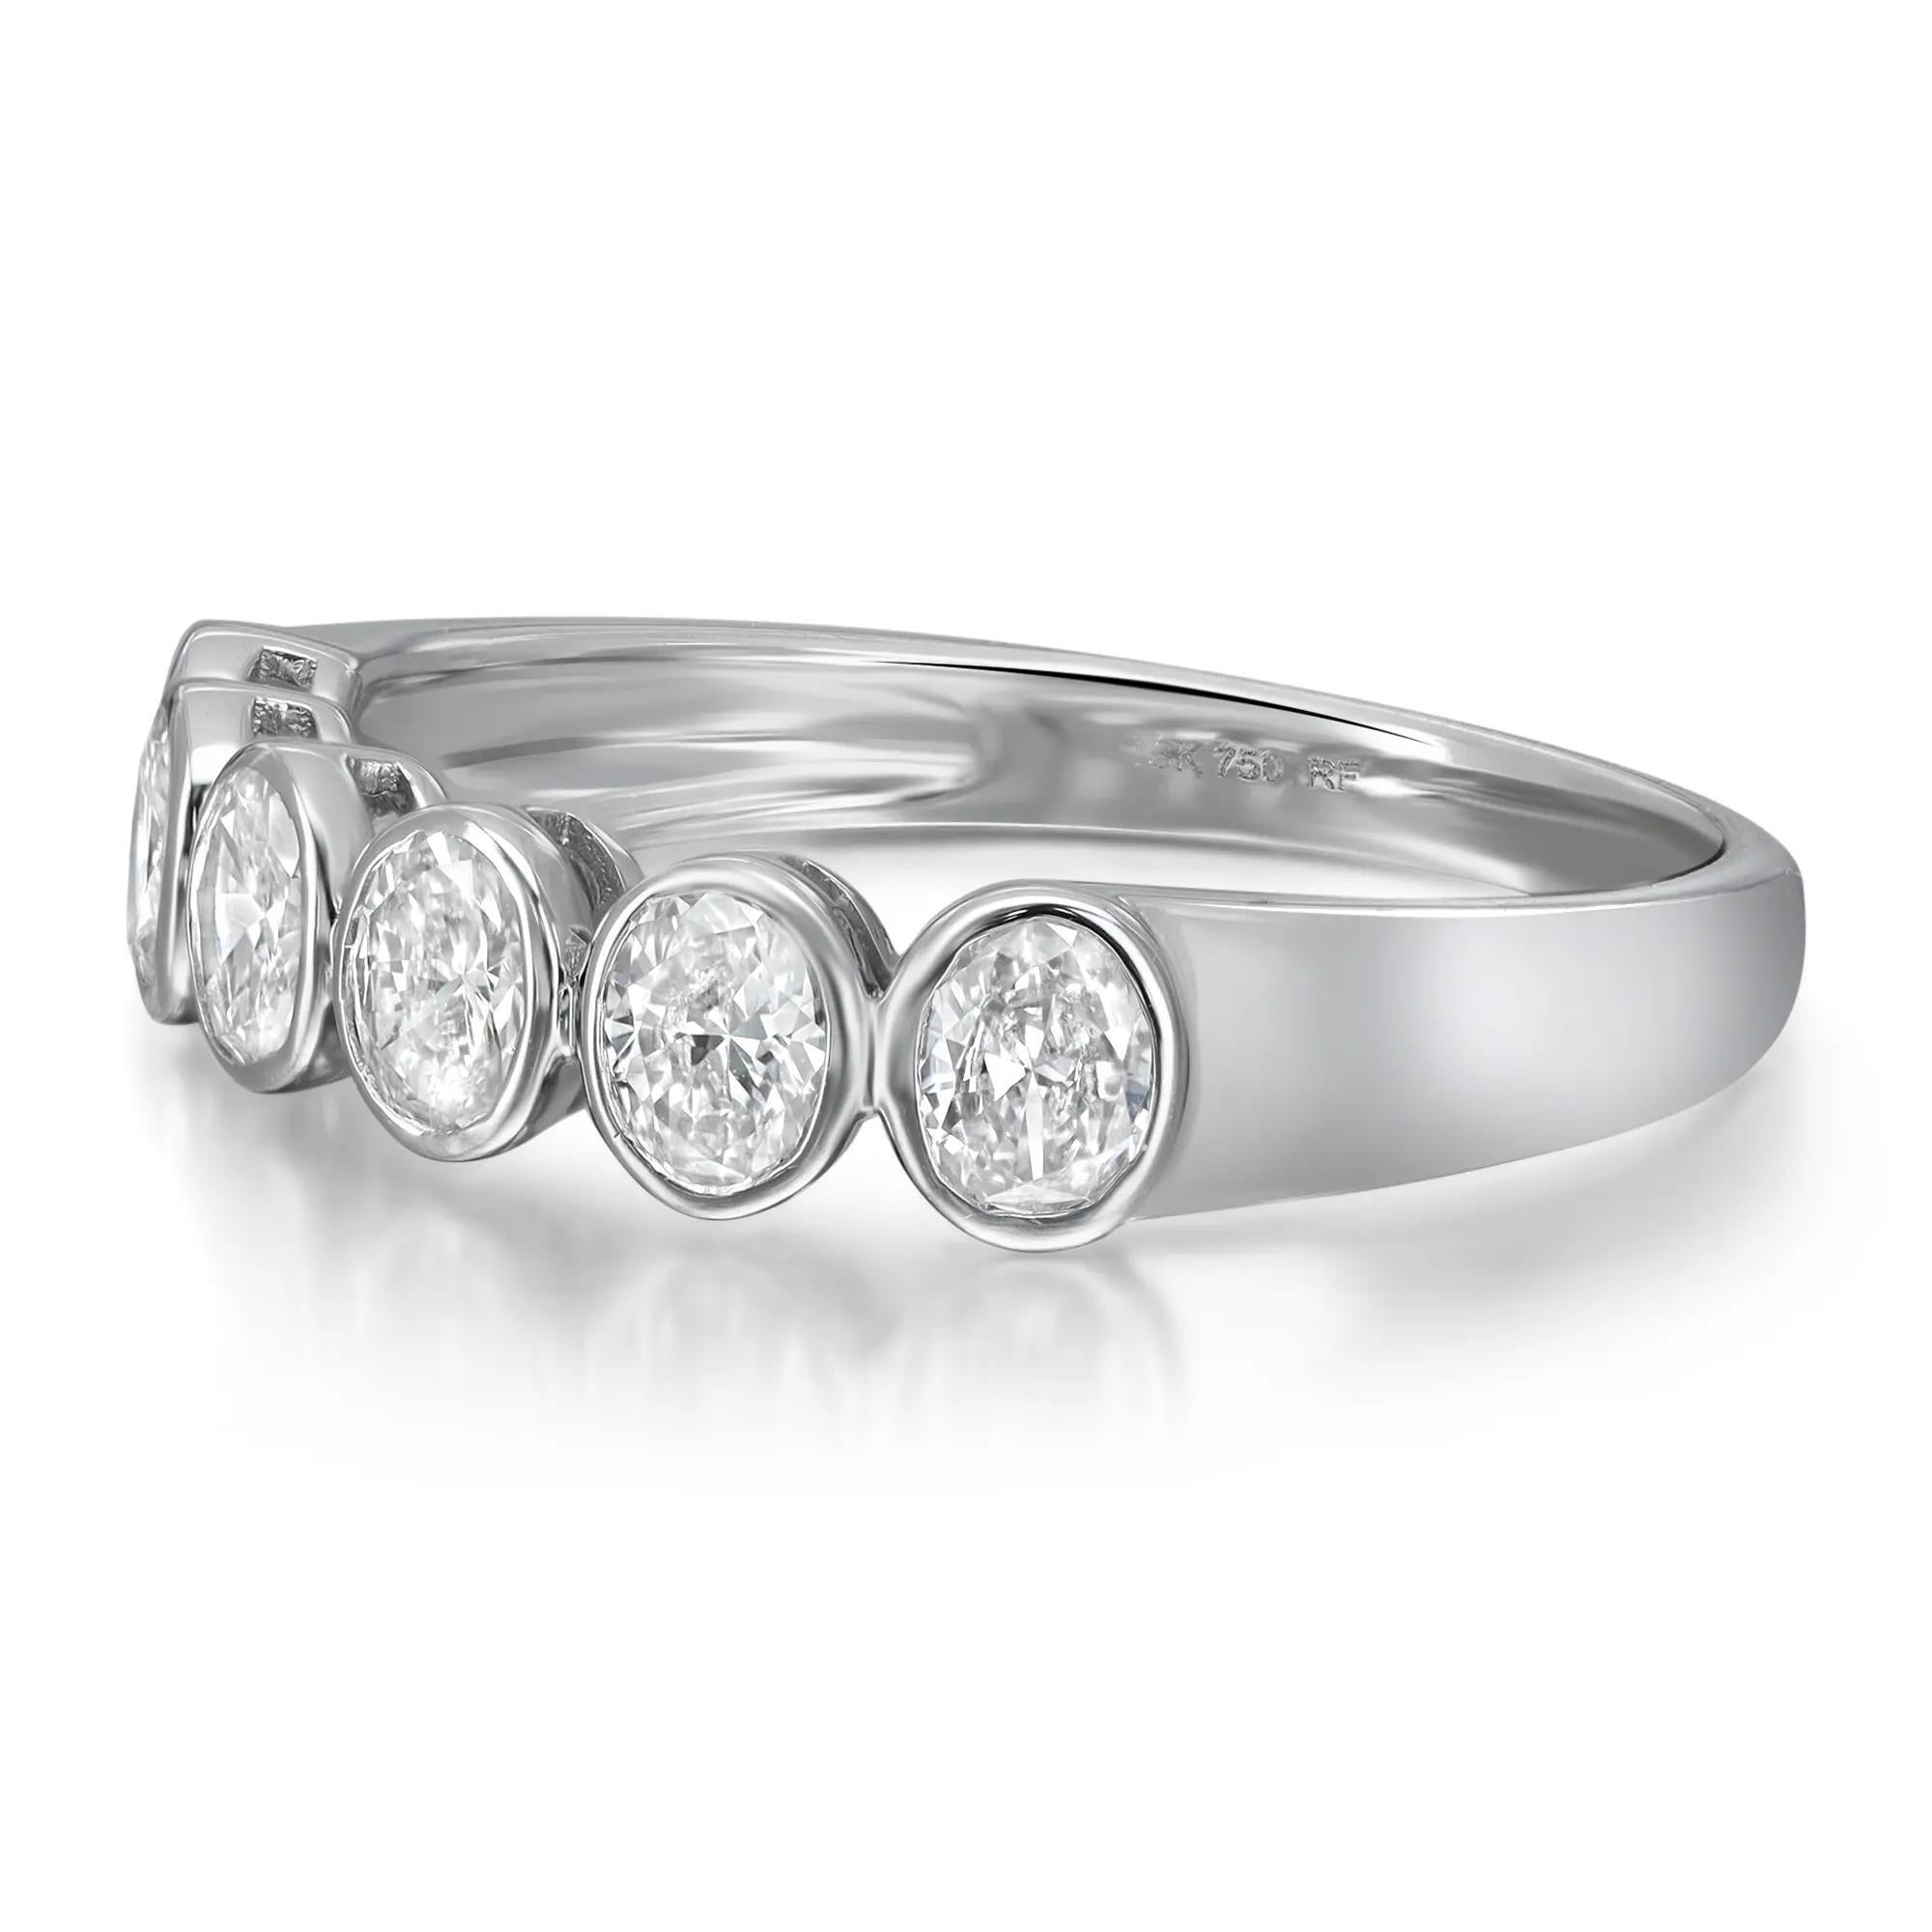 Celebrate everlasting love with this enchanting eternity band ring. Crafted in high polished 18K white gold. Showcasing 6 bezel set oval cut dazzling diamonds weighing 0.85 carat. Diamond quality: color G-H and clarity VS-SI. Ring size: 6.5. Width: